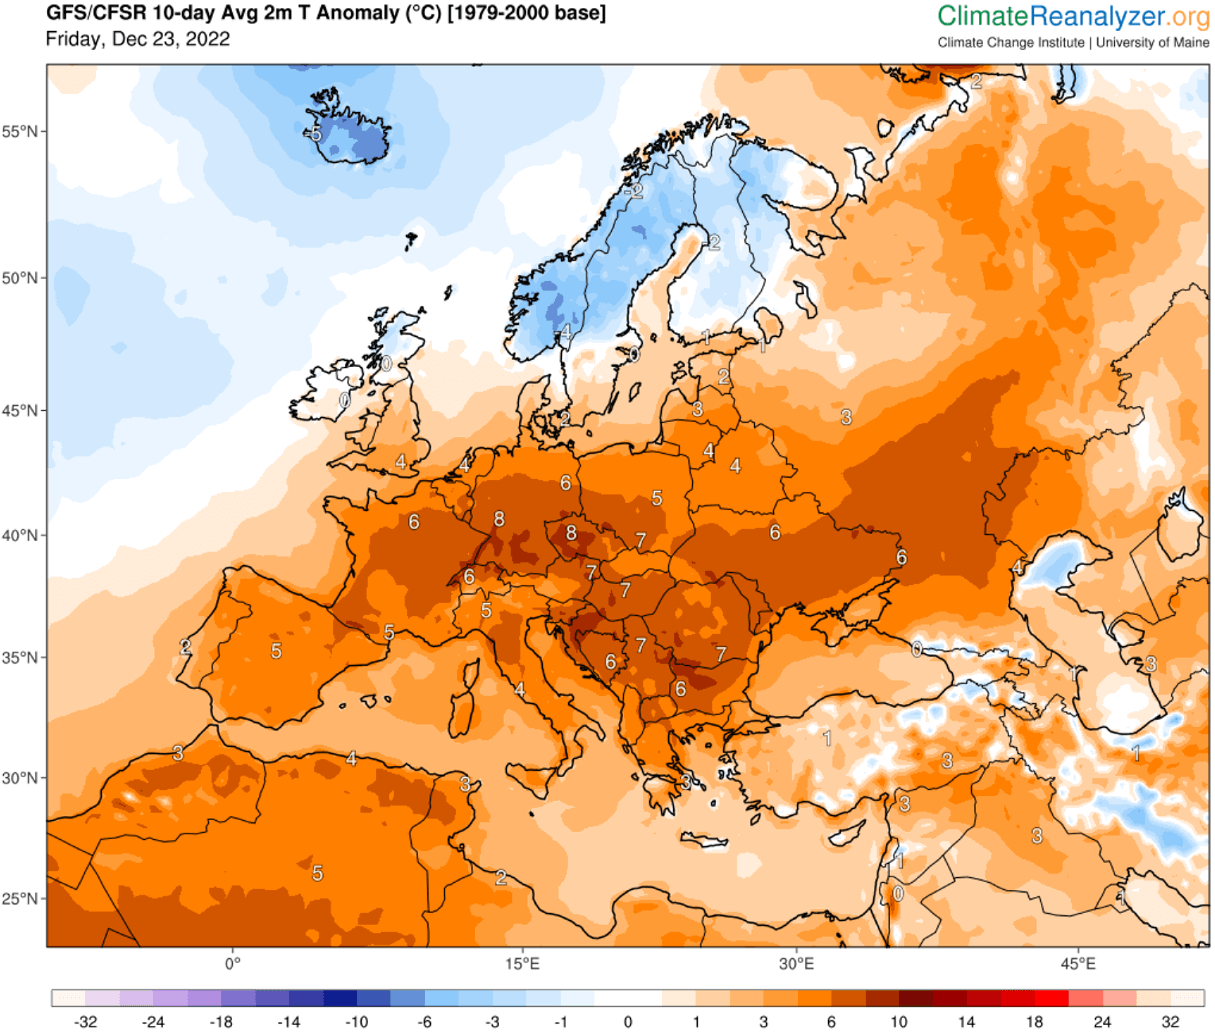 winter-season-2022-2023-warmth-europe-christmas-new-year-forecast-2m-temperature-anomaly